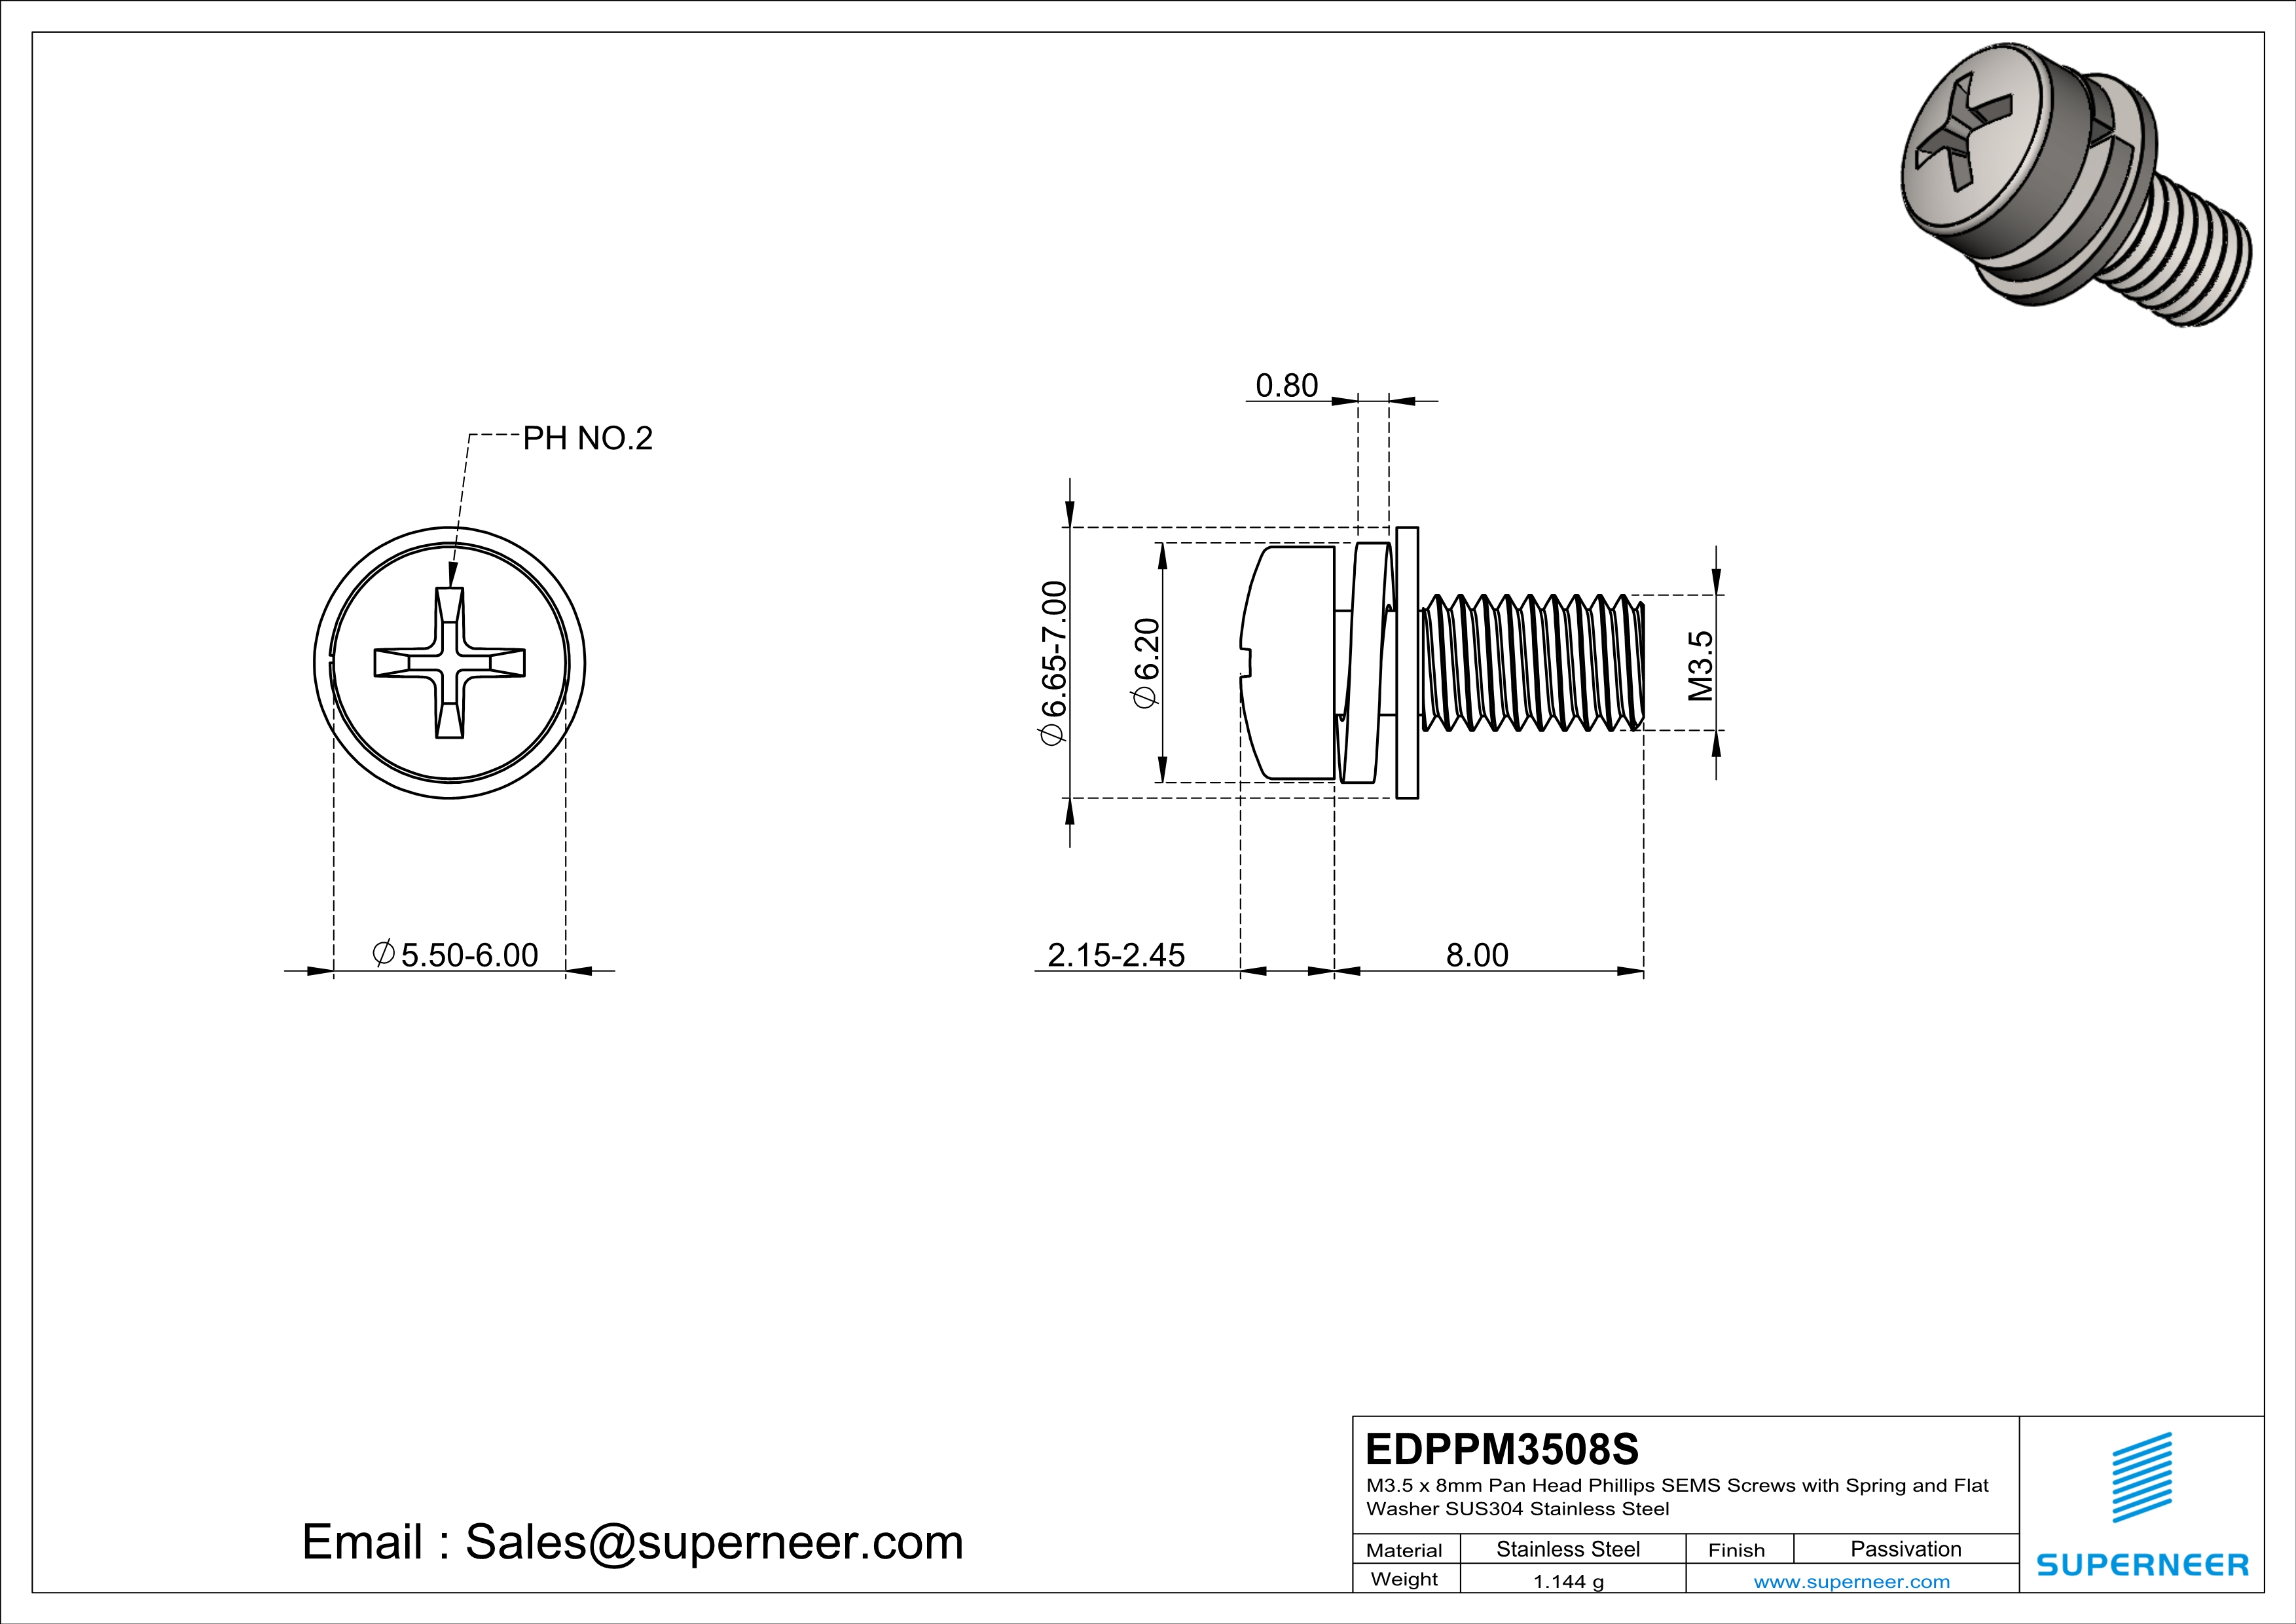 M3.5 x 8mm Pan Head Phillips SEMS Screws with Spring and Flat Washer SUS304 Stainless Steel Inox